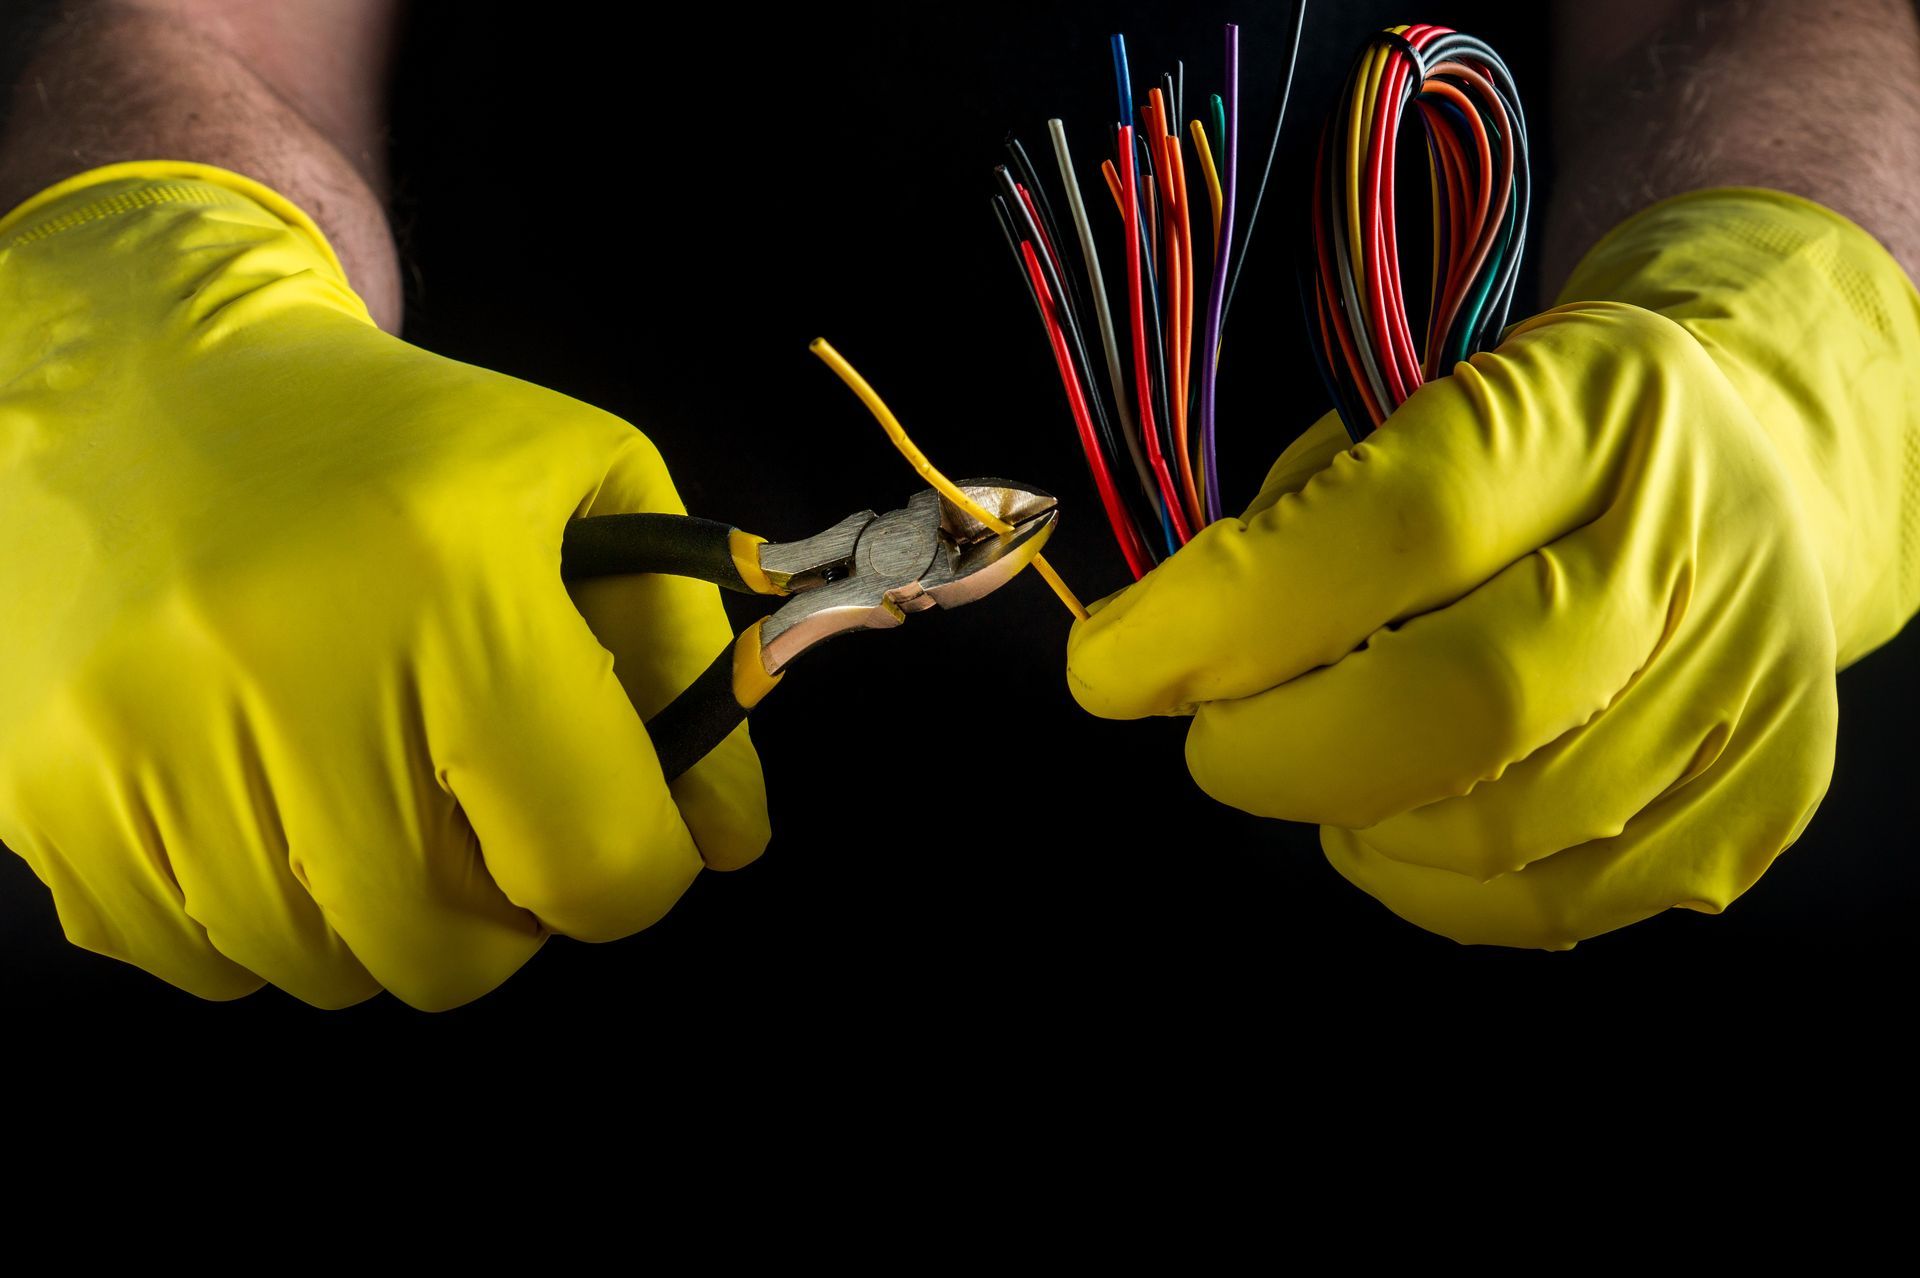 hands hold wire cutters in a close-up of wires